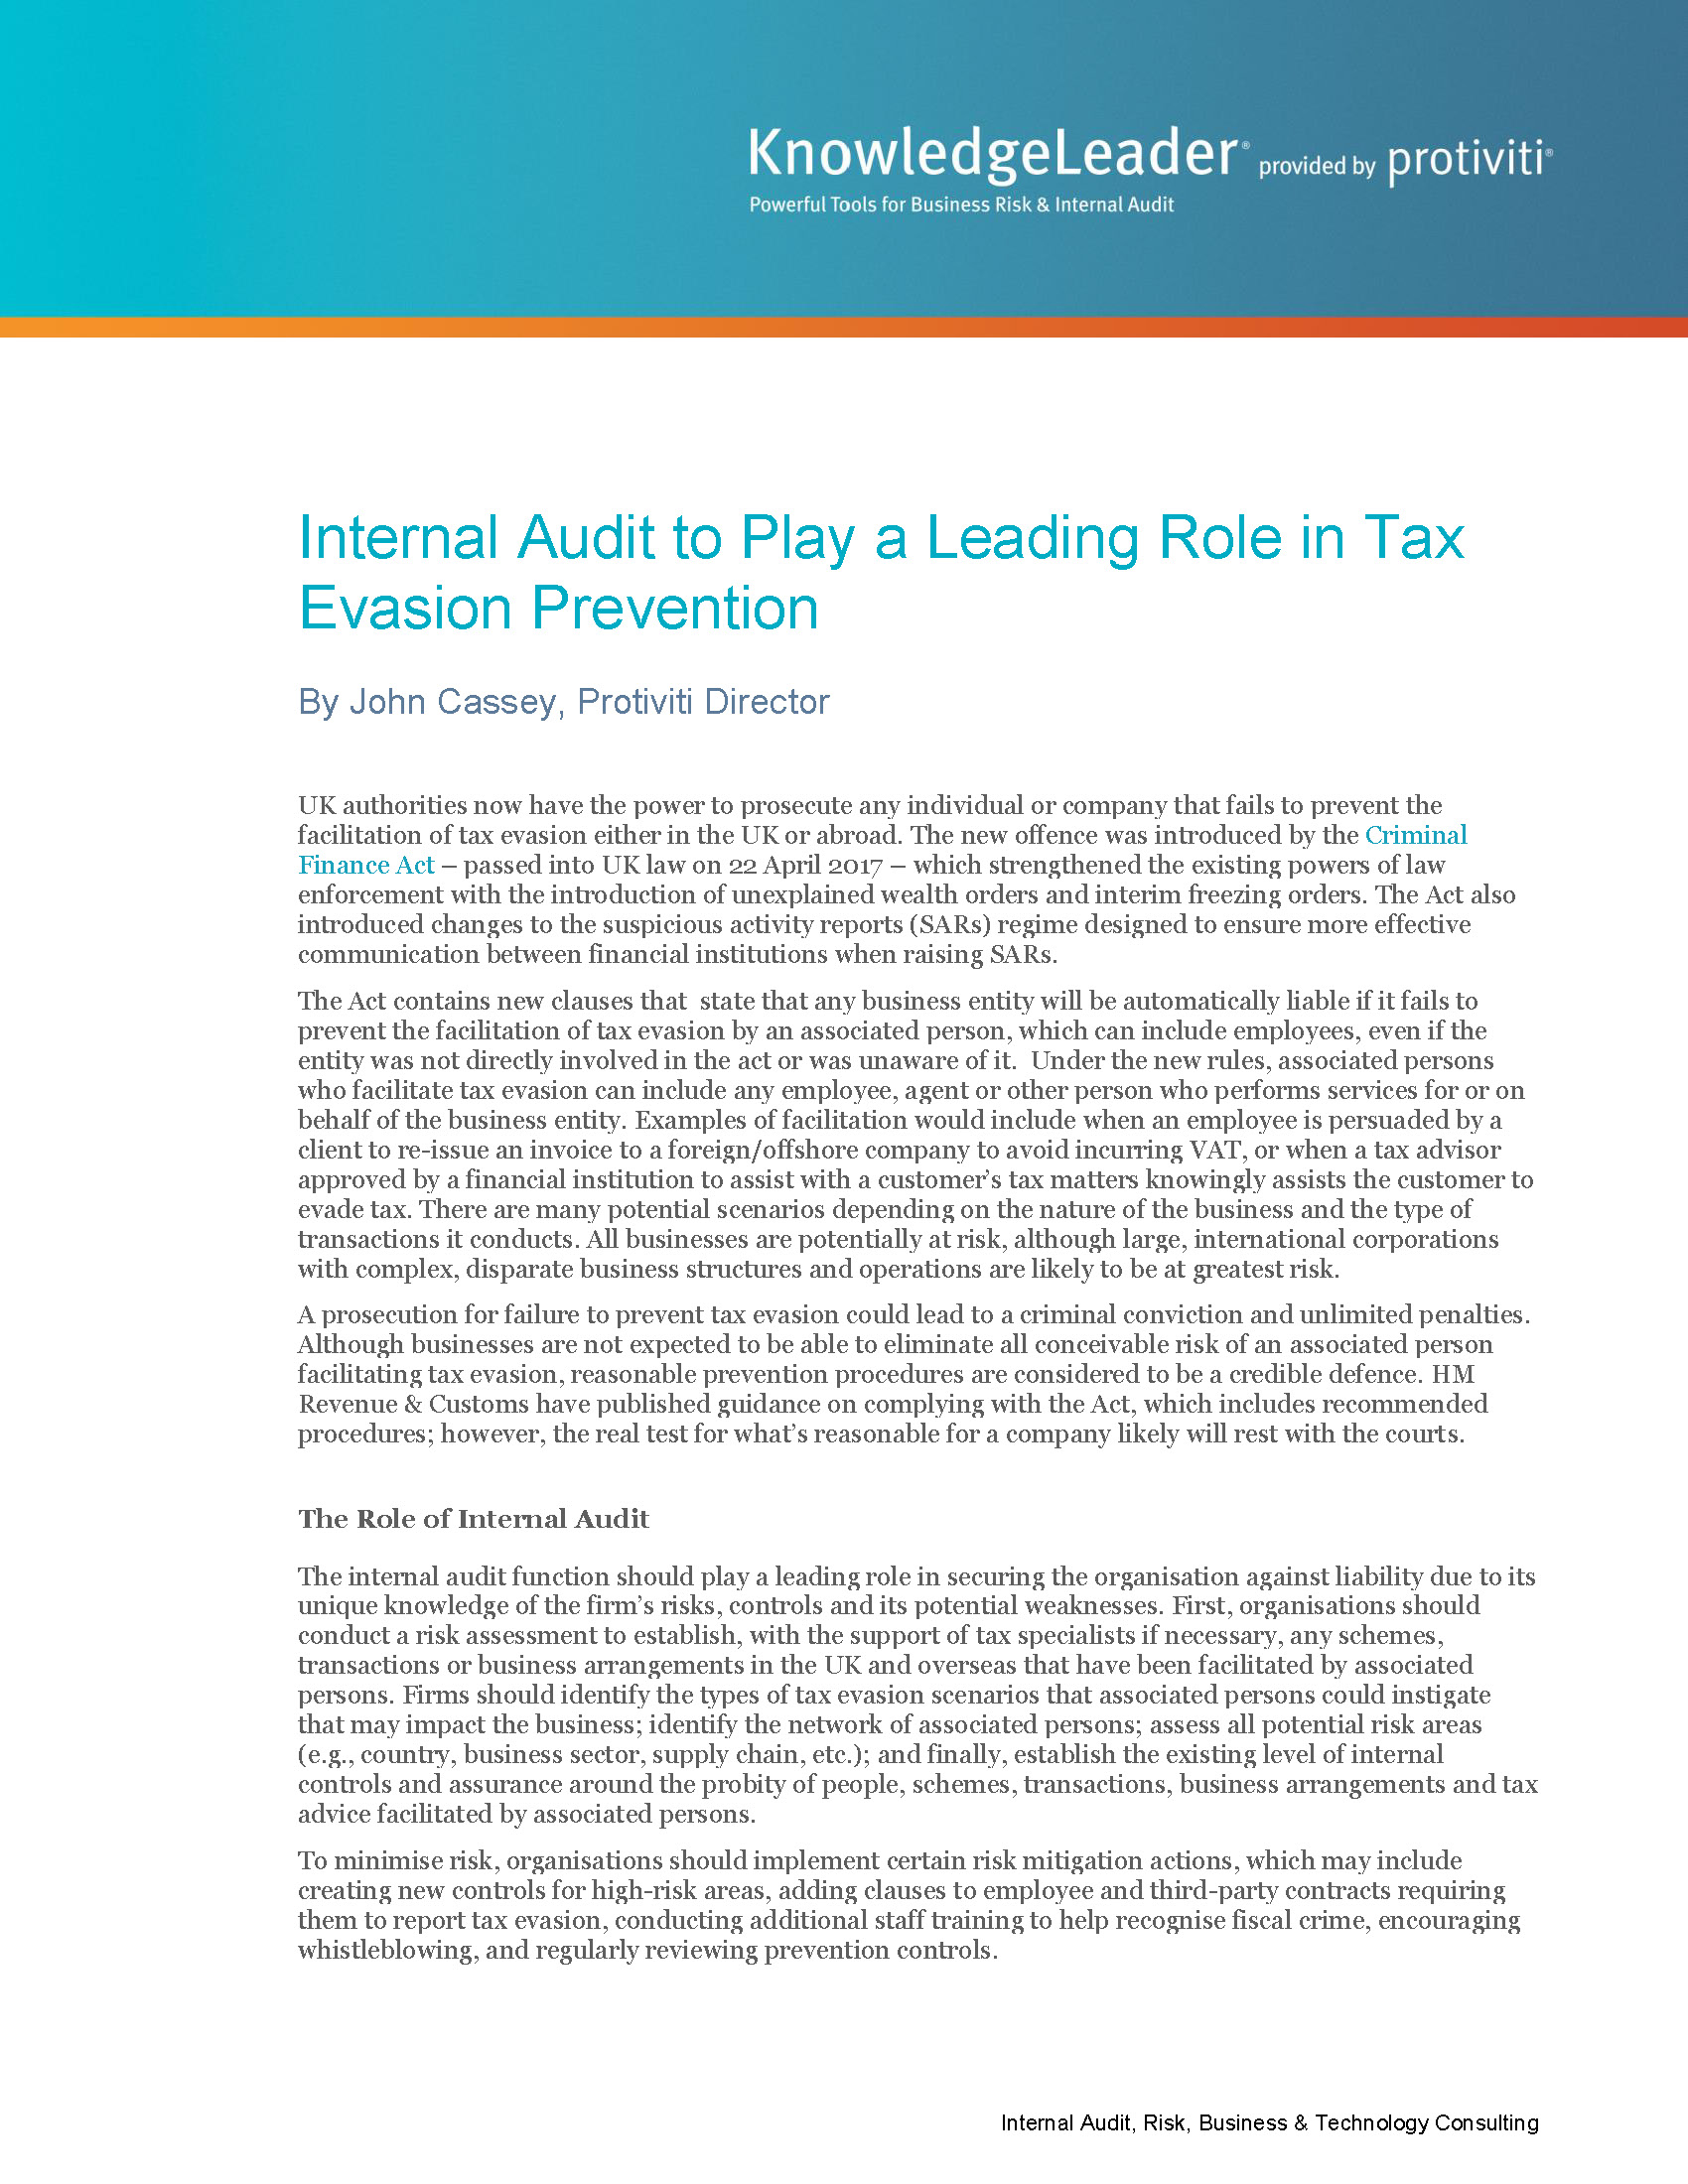 Screenshot of the first page of Internal Audit to Play a Leading Role in Tax Evasion Prevention